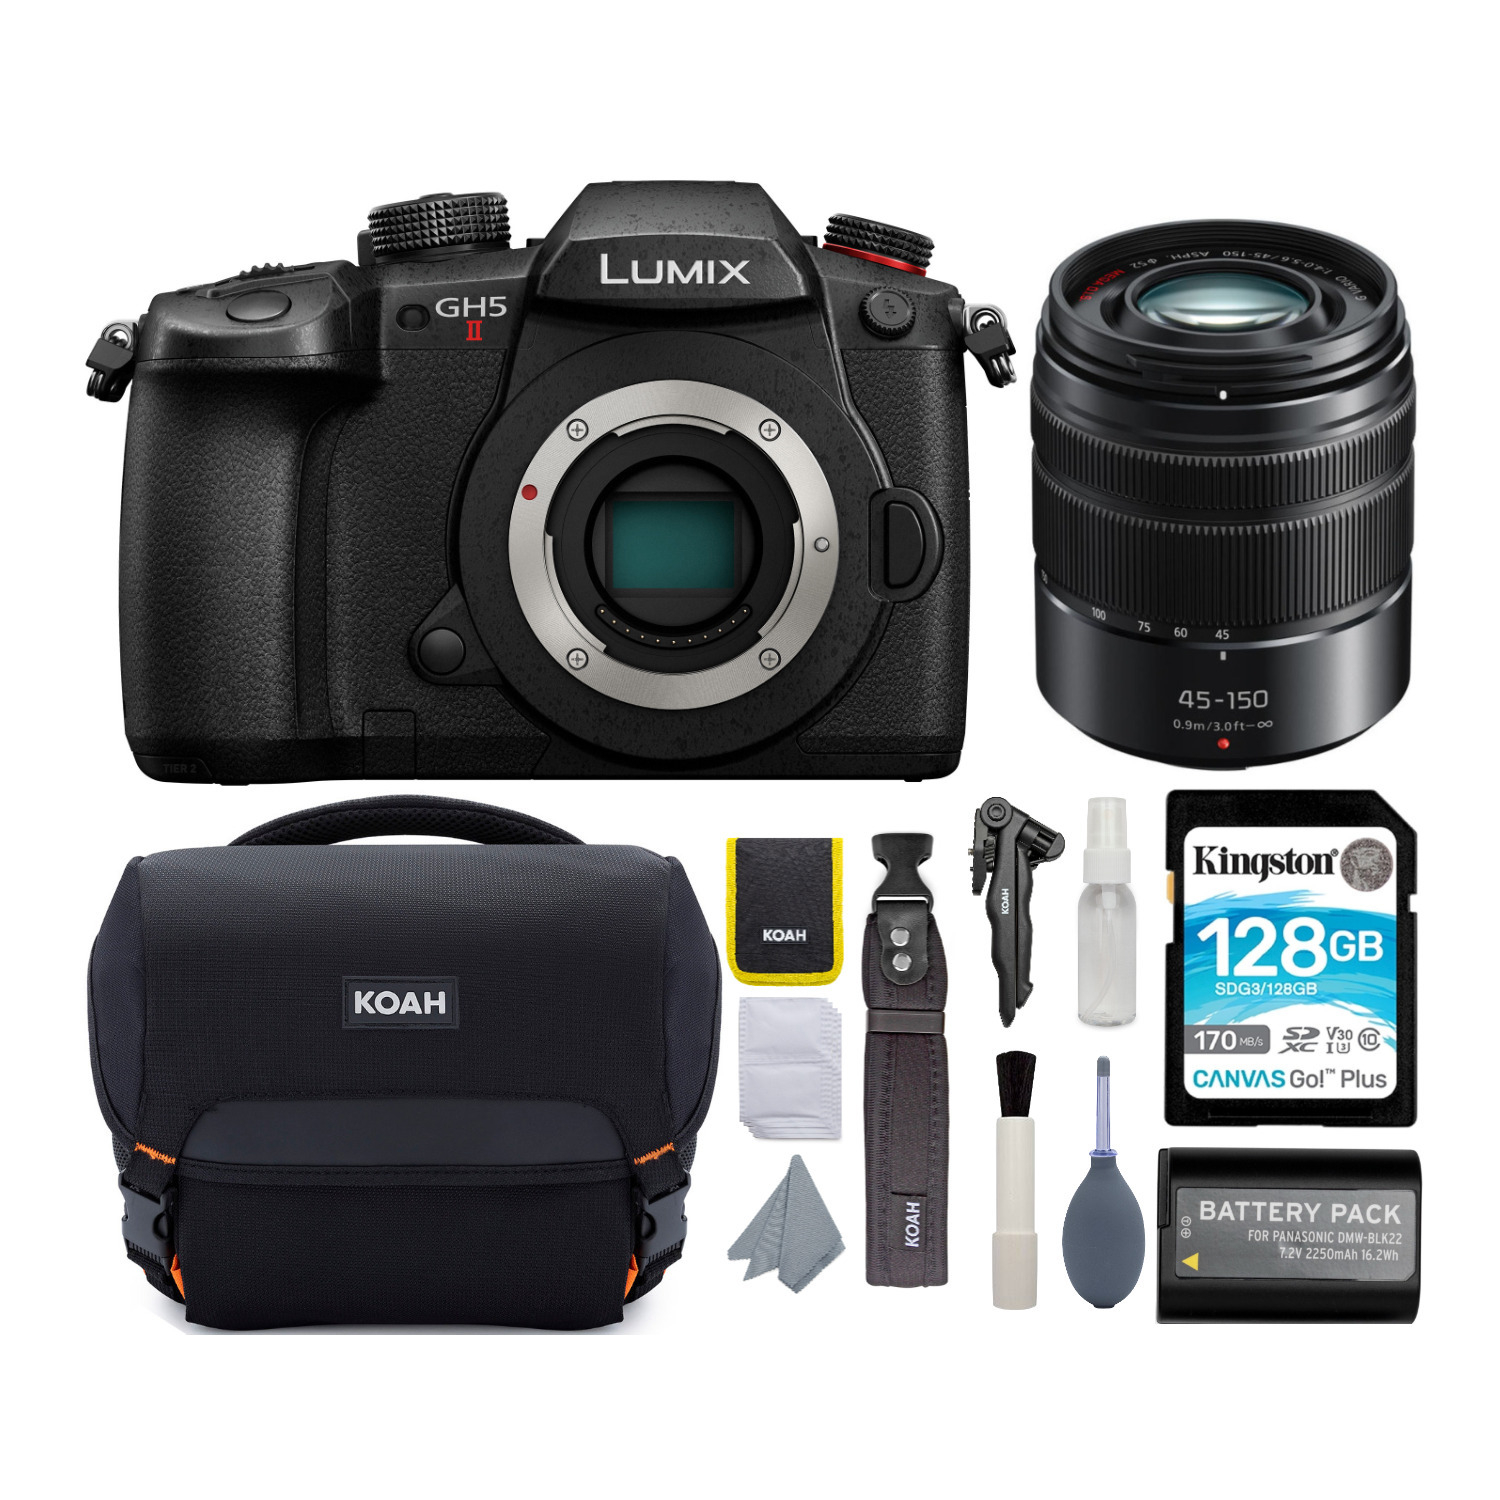 Panasonic LUMIX GH5 II Mirrorless Camera (Body Only) with 45-150mm Camera Lens Bundle in Black